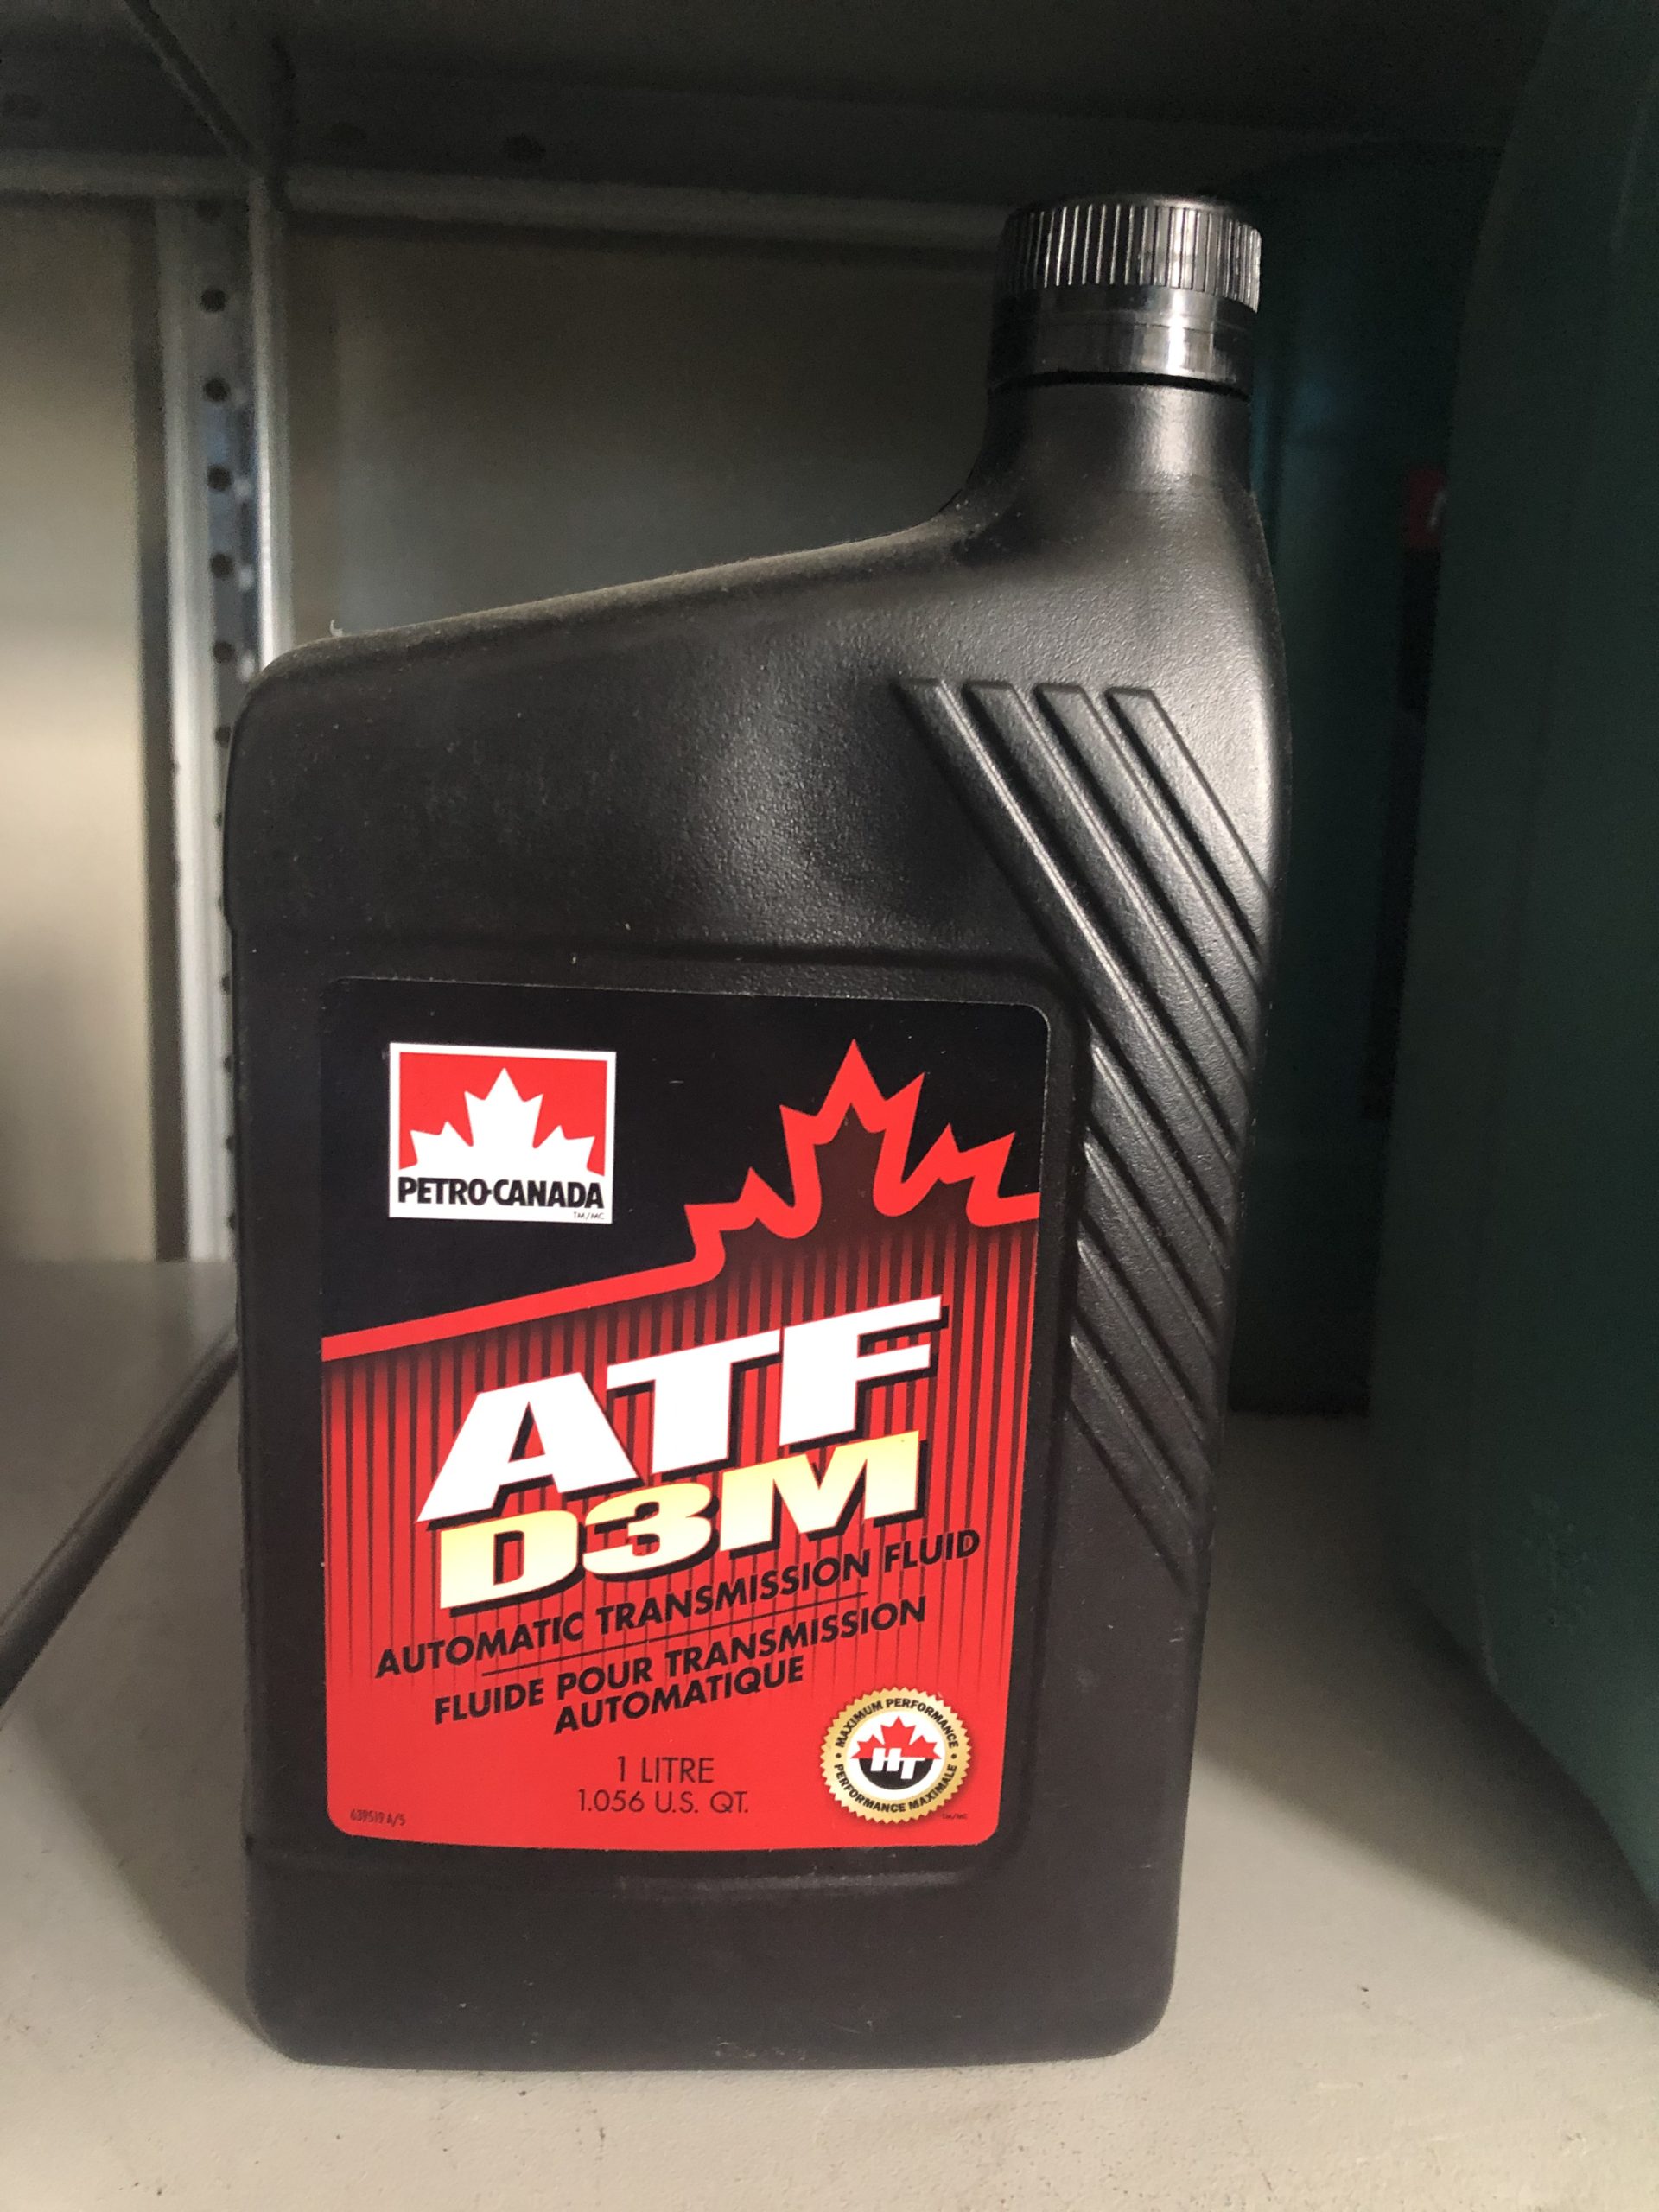 Canada atf. Масло АТФ декстрон 3 Petro Canada. Масло Petro-Canada ATF d3m 1л. Petro-Canada ATF+4. Petro-Canada ATF d3m Прадо 95.